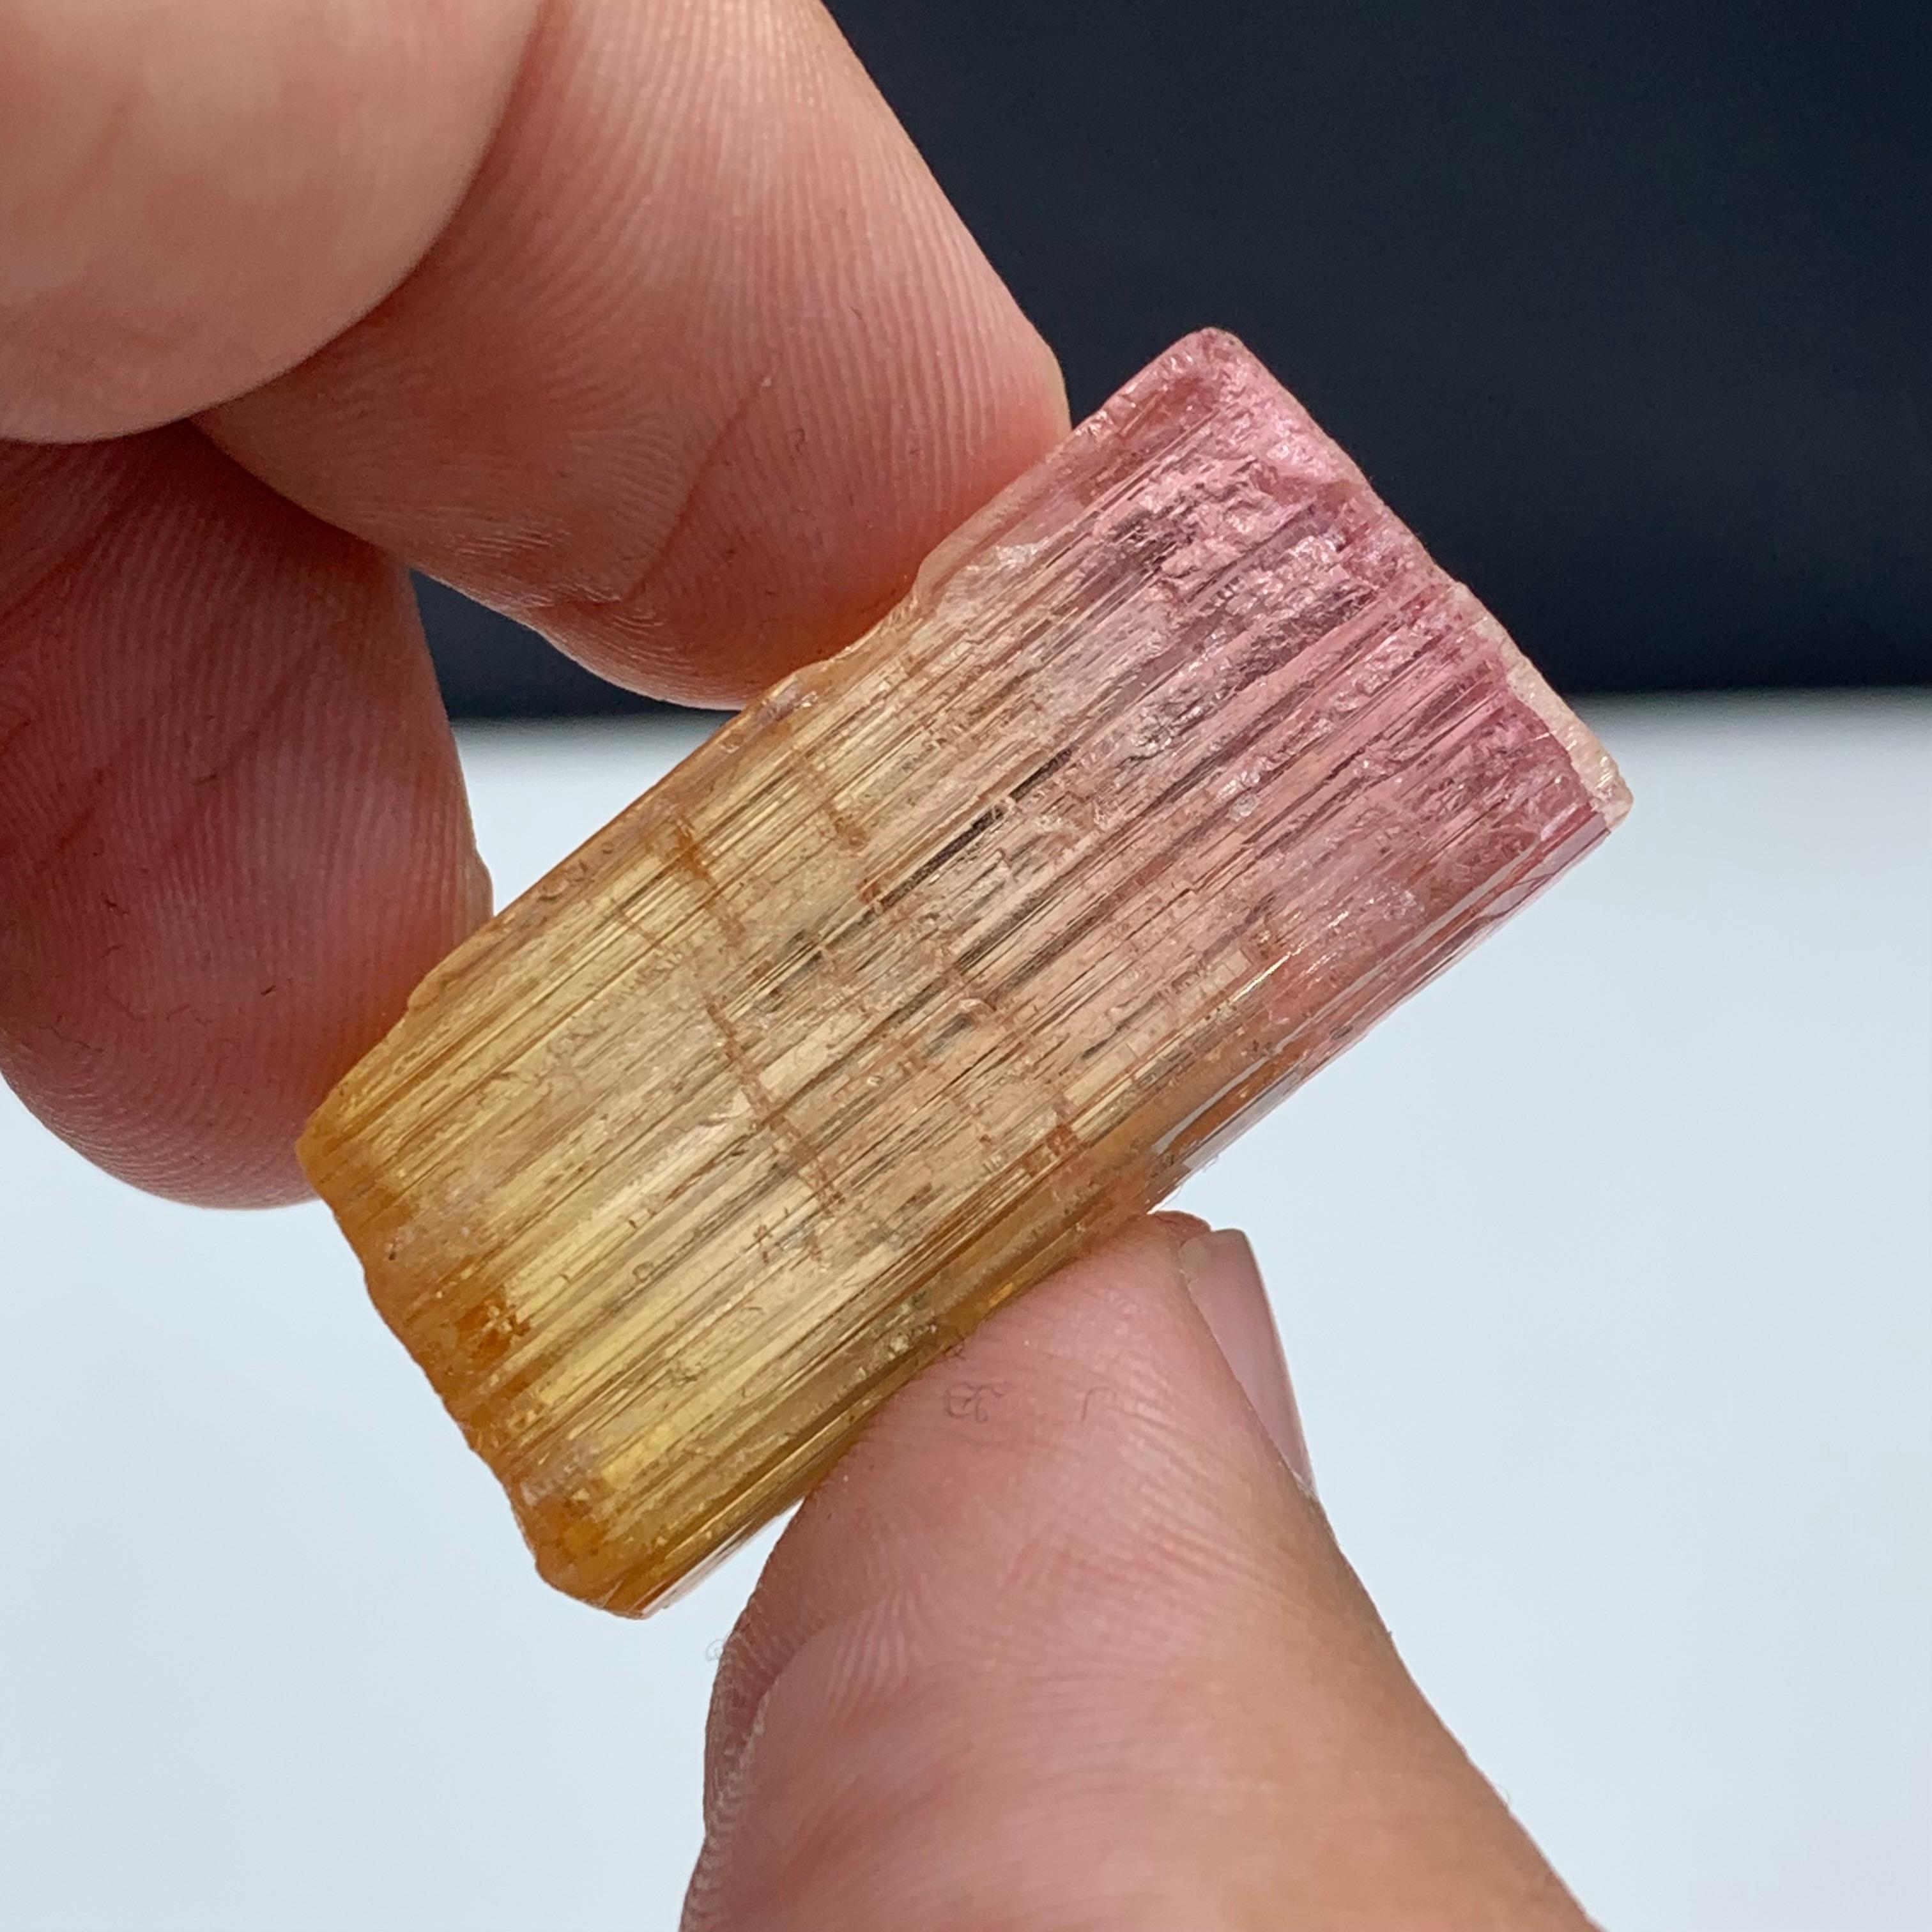 48 Carat Amazing Bi Color Tourmaline Crystal From Paprook Mine, Afghanistan For Sale 1